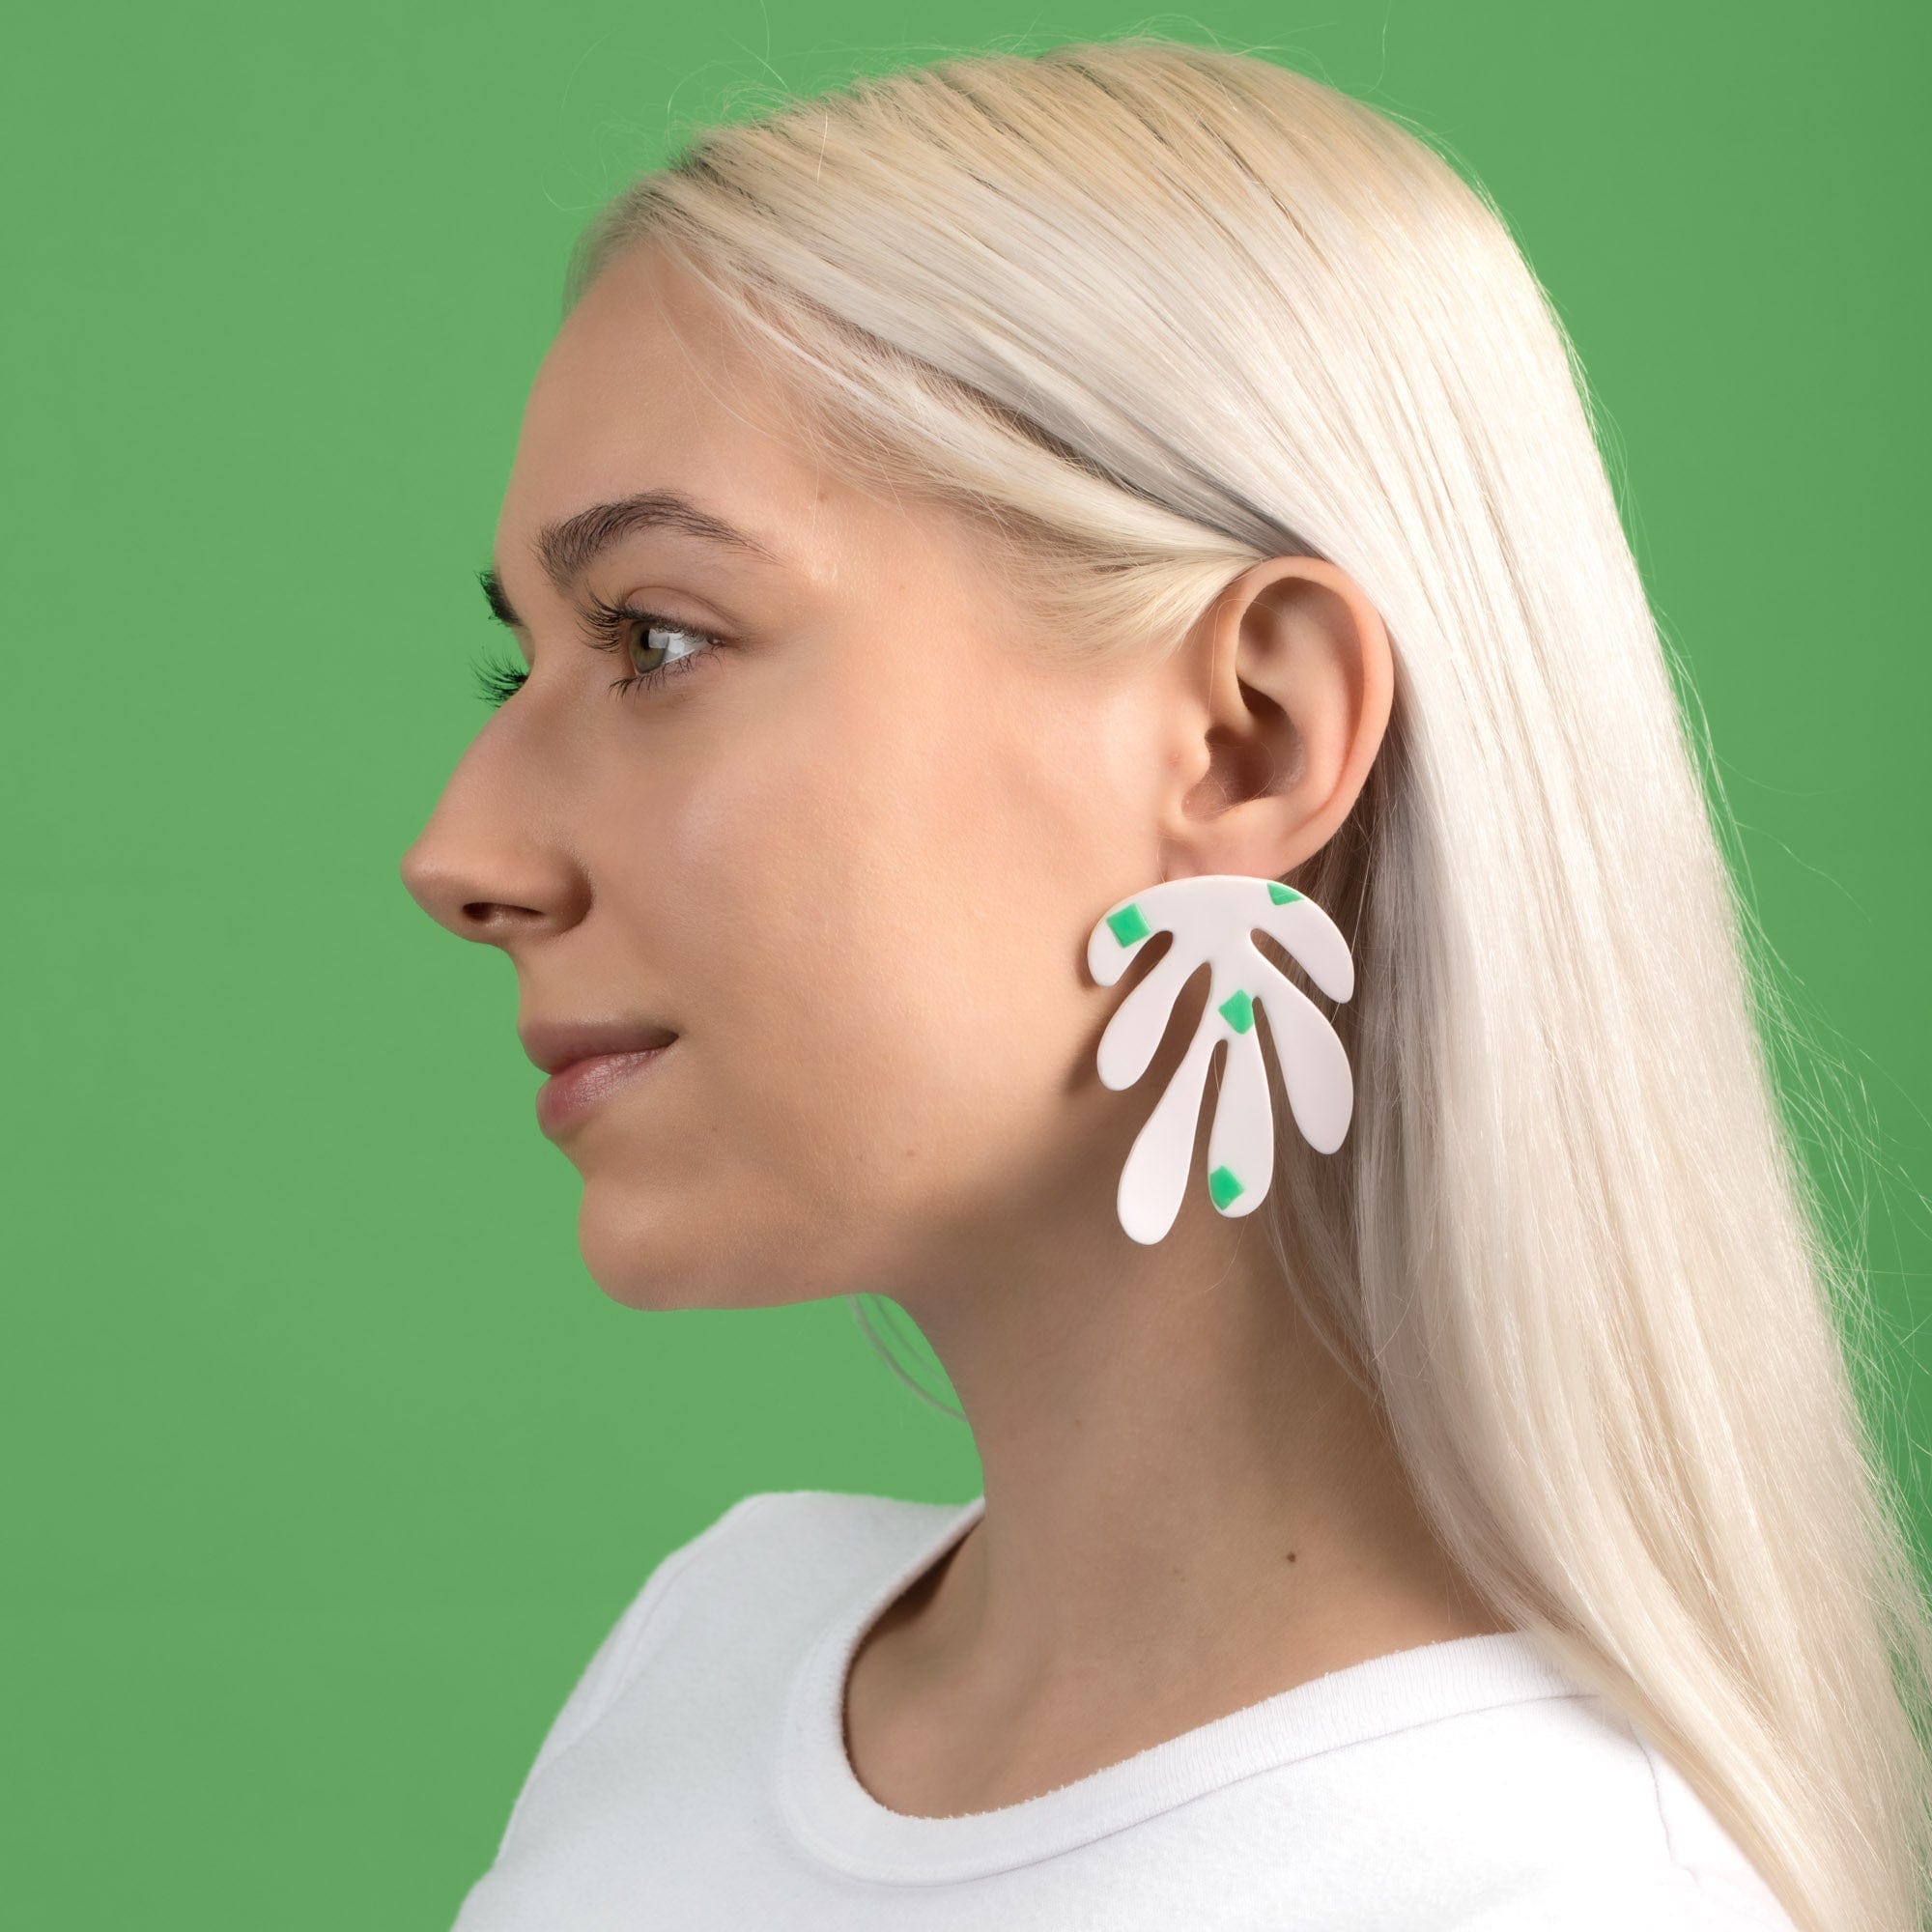 Matisse inspired white and green stud statement earrings handmade in polymer clay